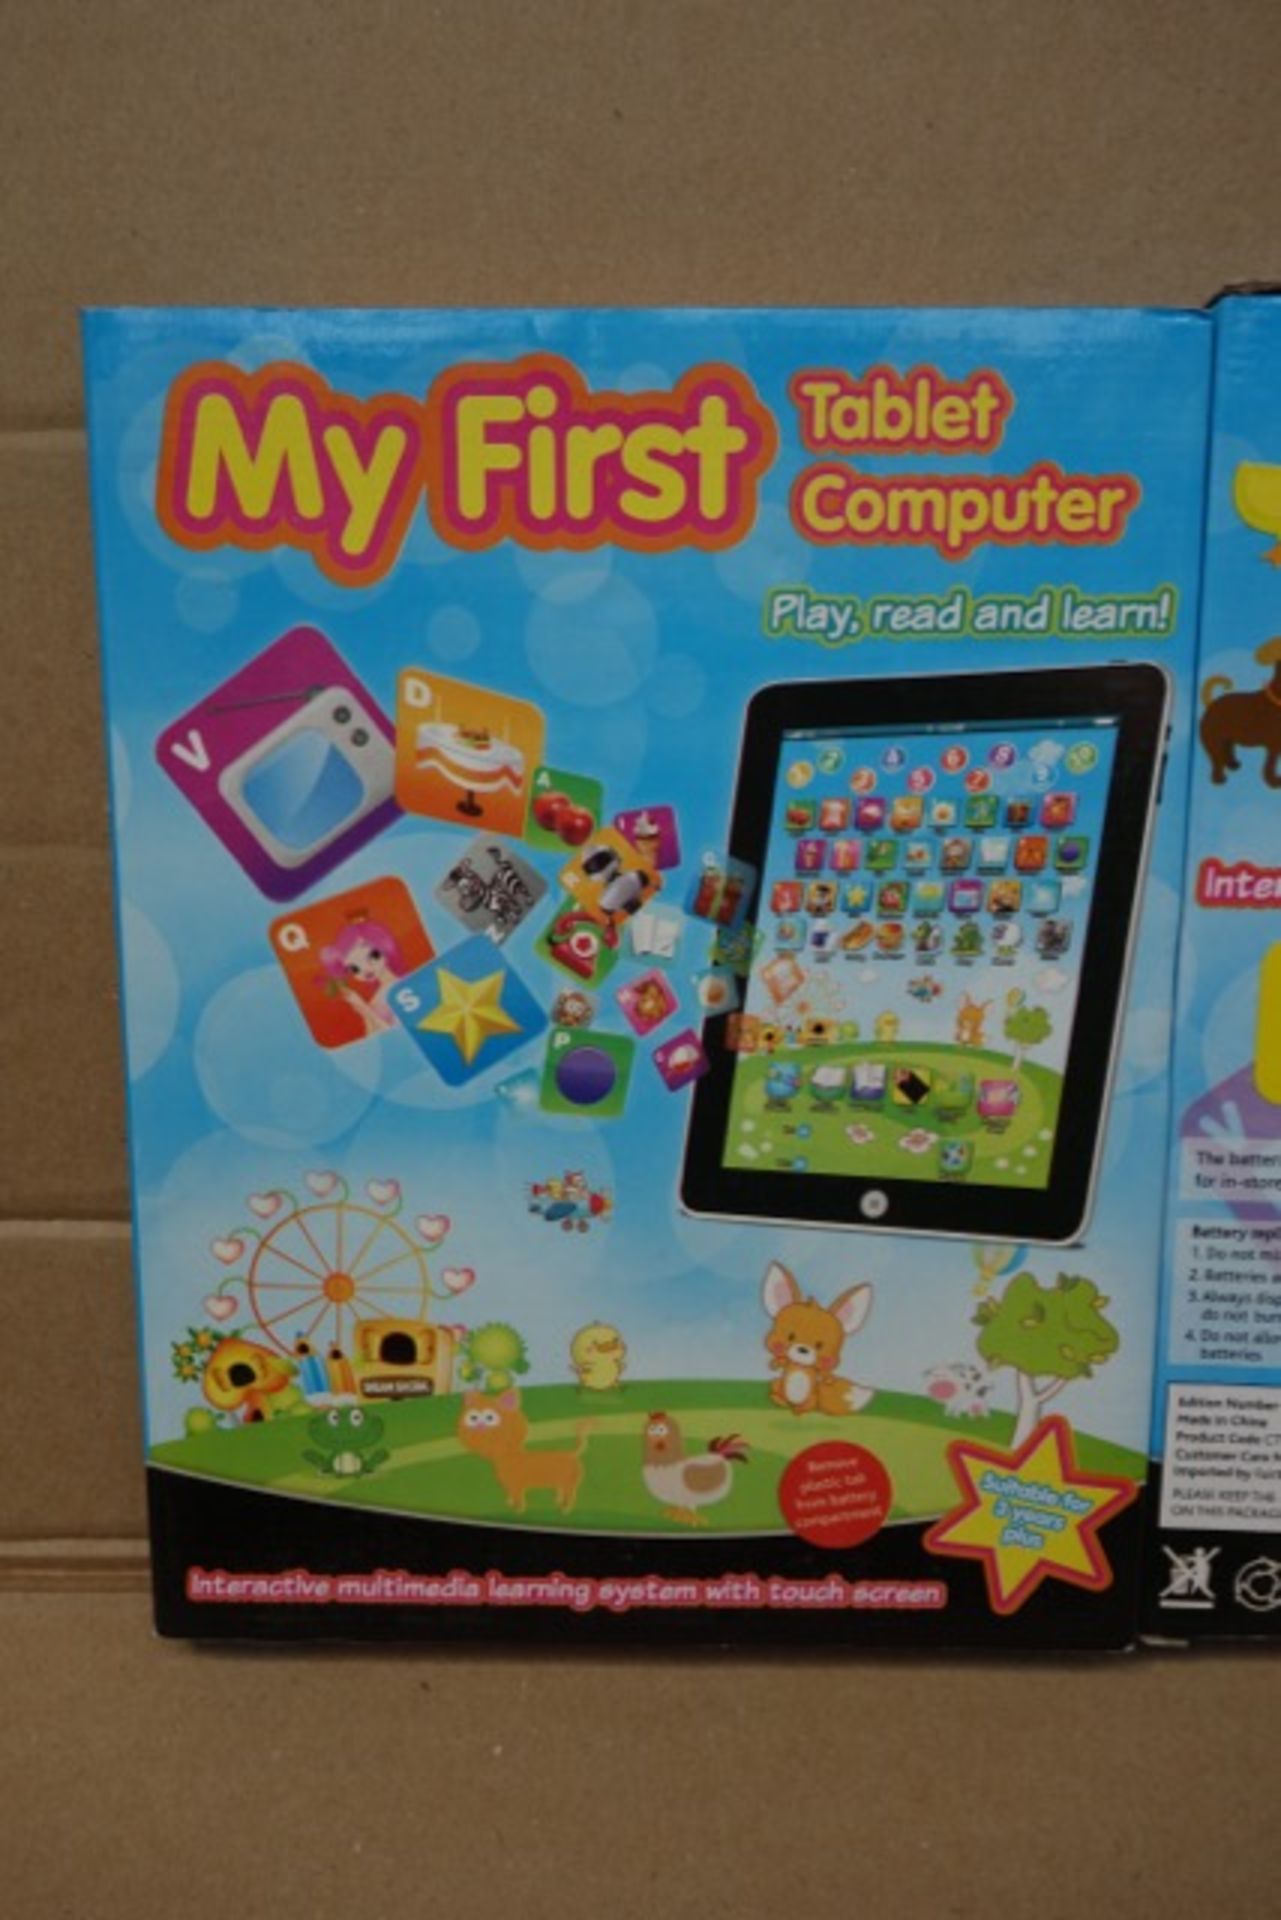 48 x My First Tablet Computor. Play, read & learn! Interactive multimedia learning system with - Image 2 of 4